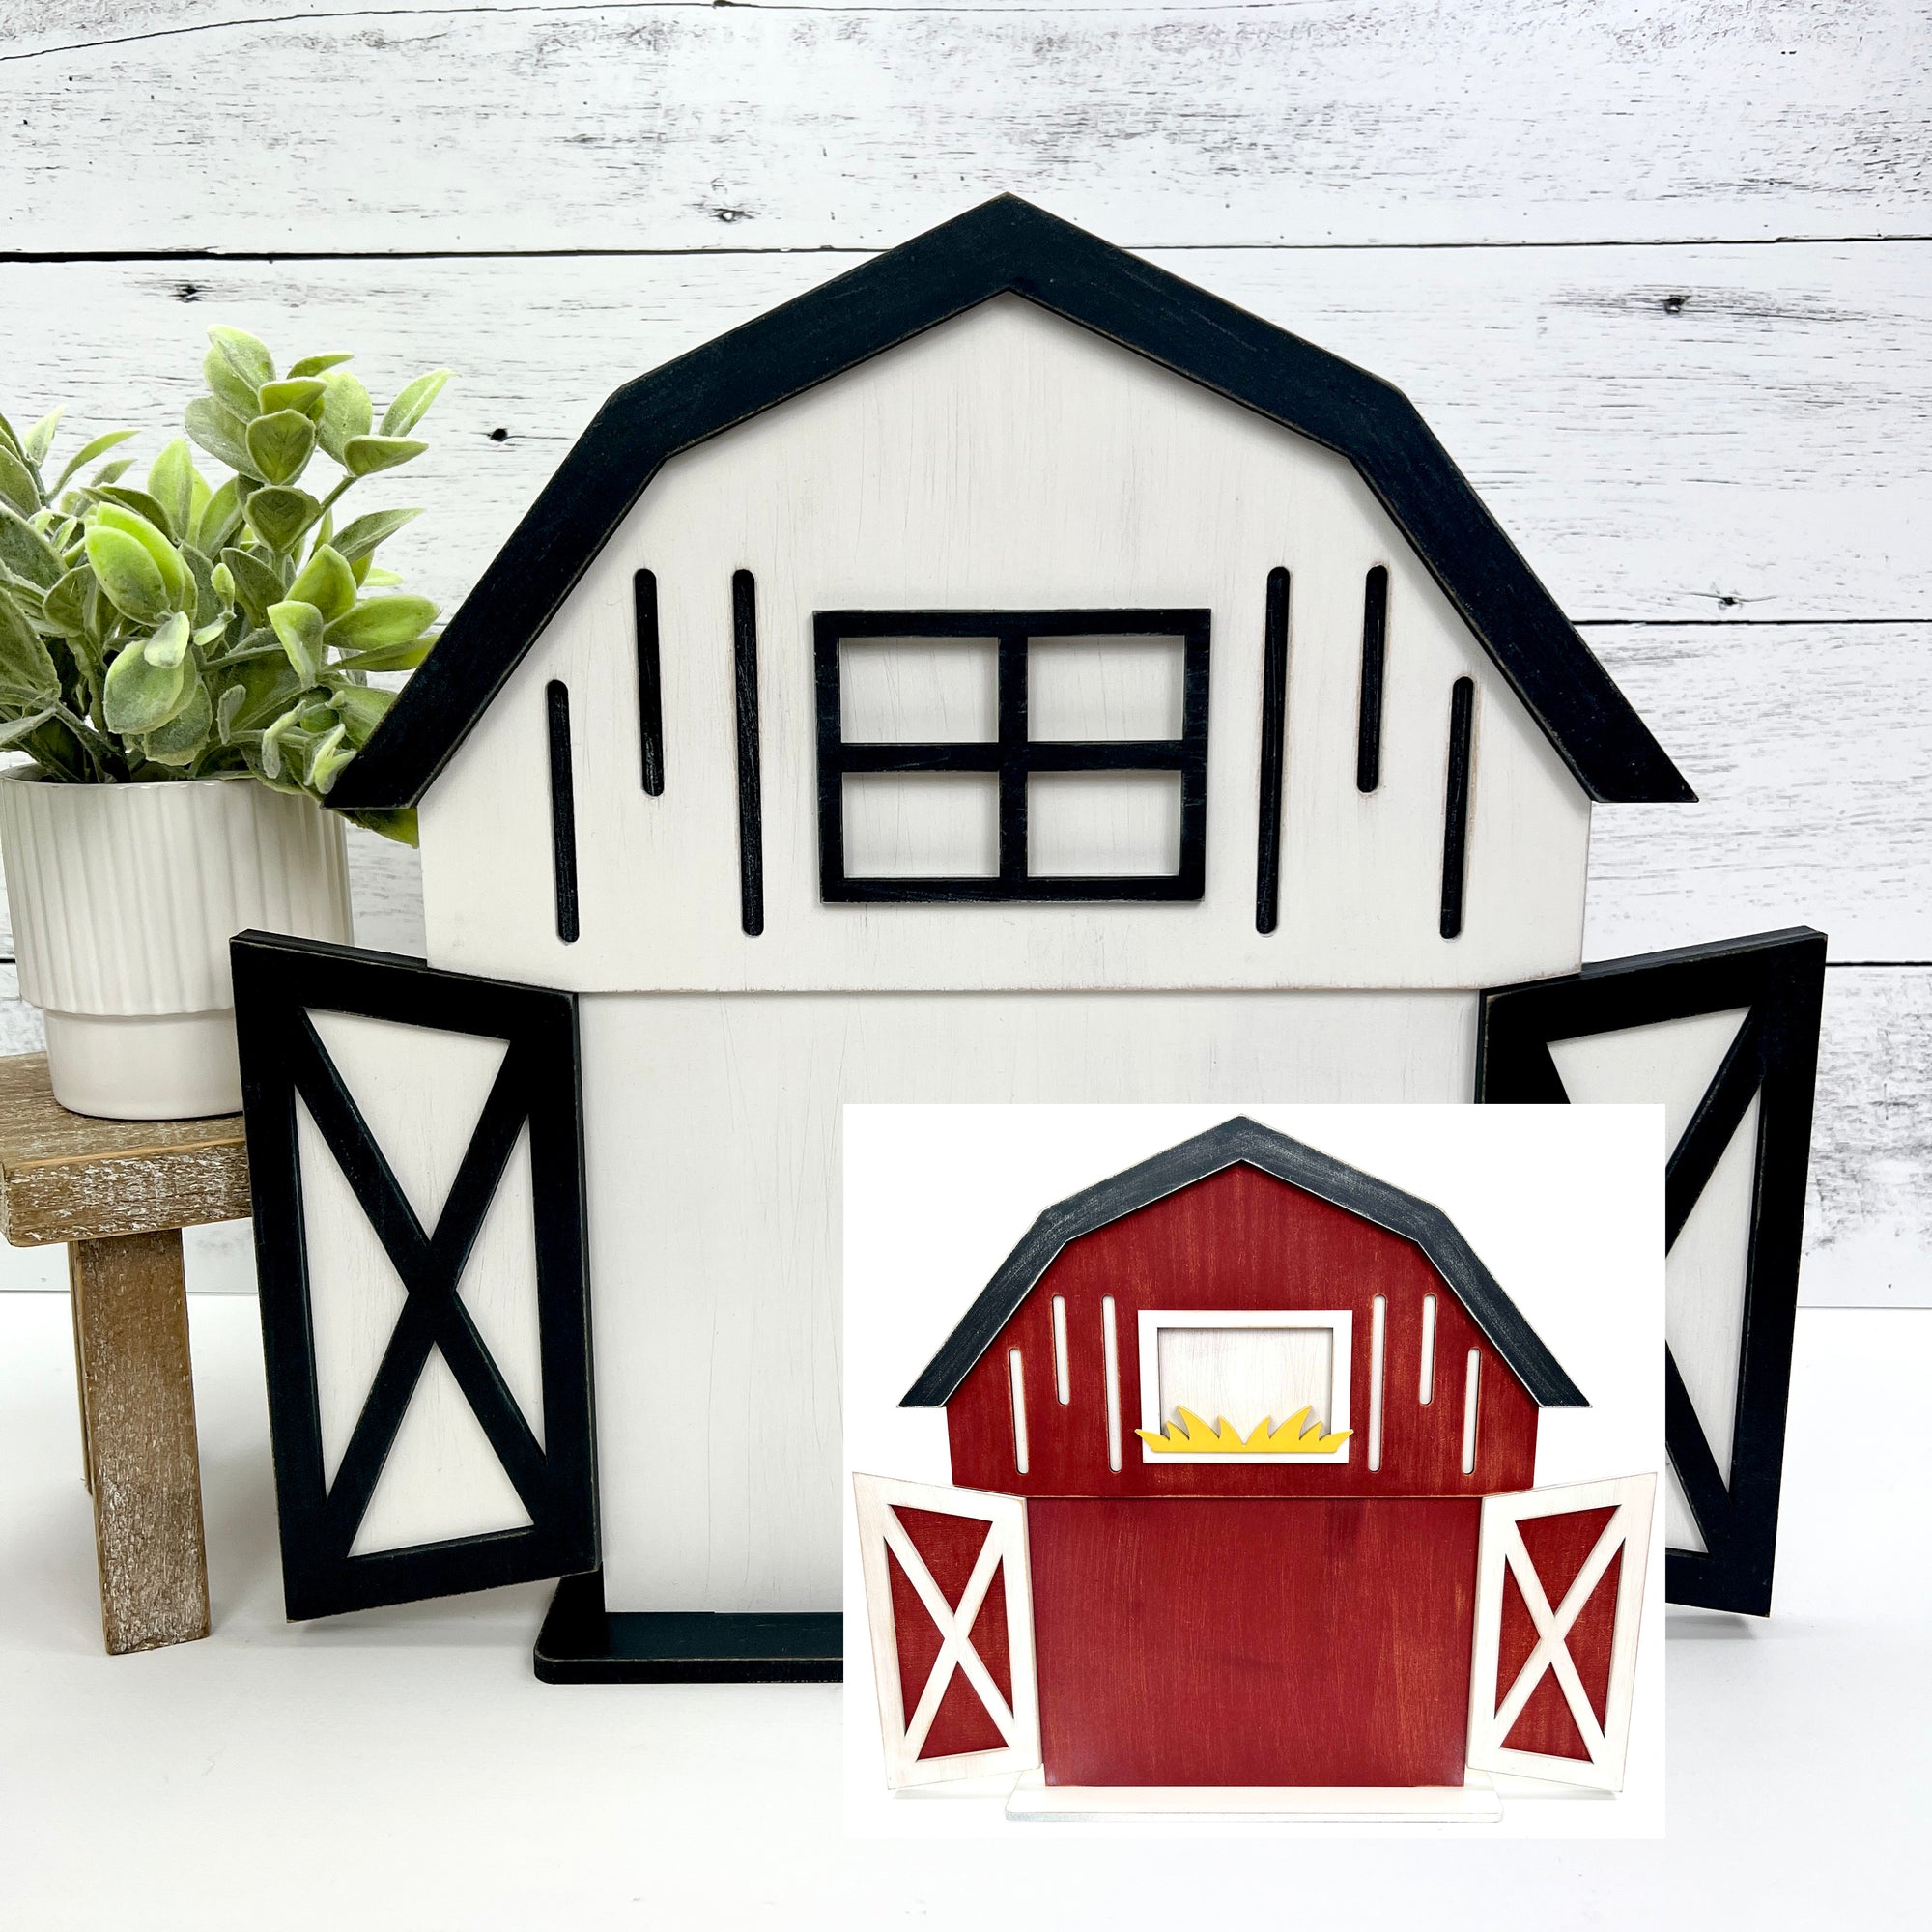 Magnolia style and farmhouse wood barn for crafting and cross stitch finishing